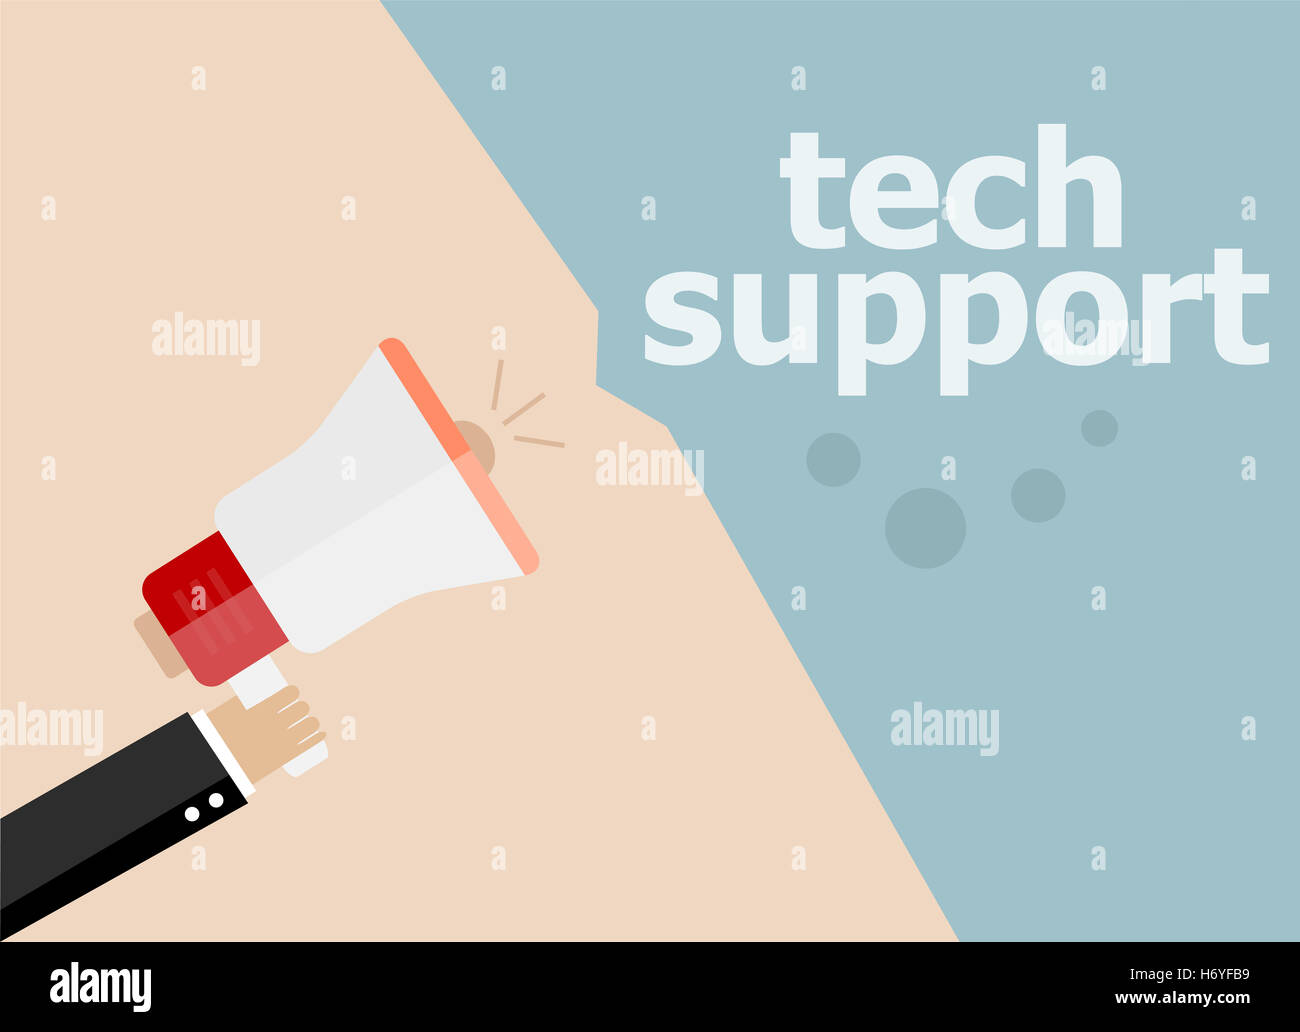 tech support, . Hand holding a megaphone. flat style Stock Photo